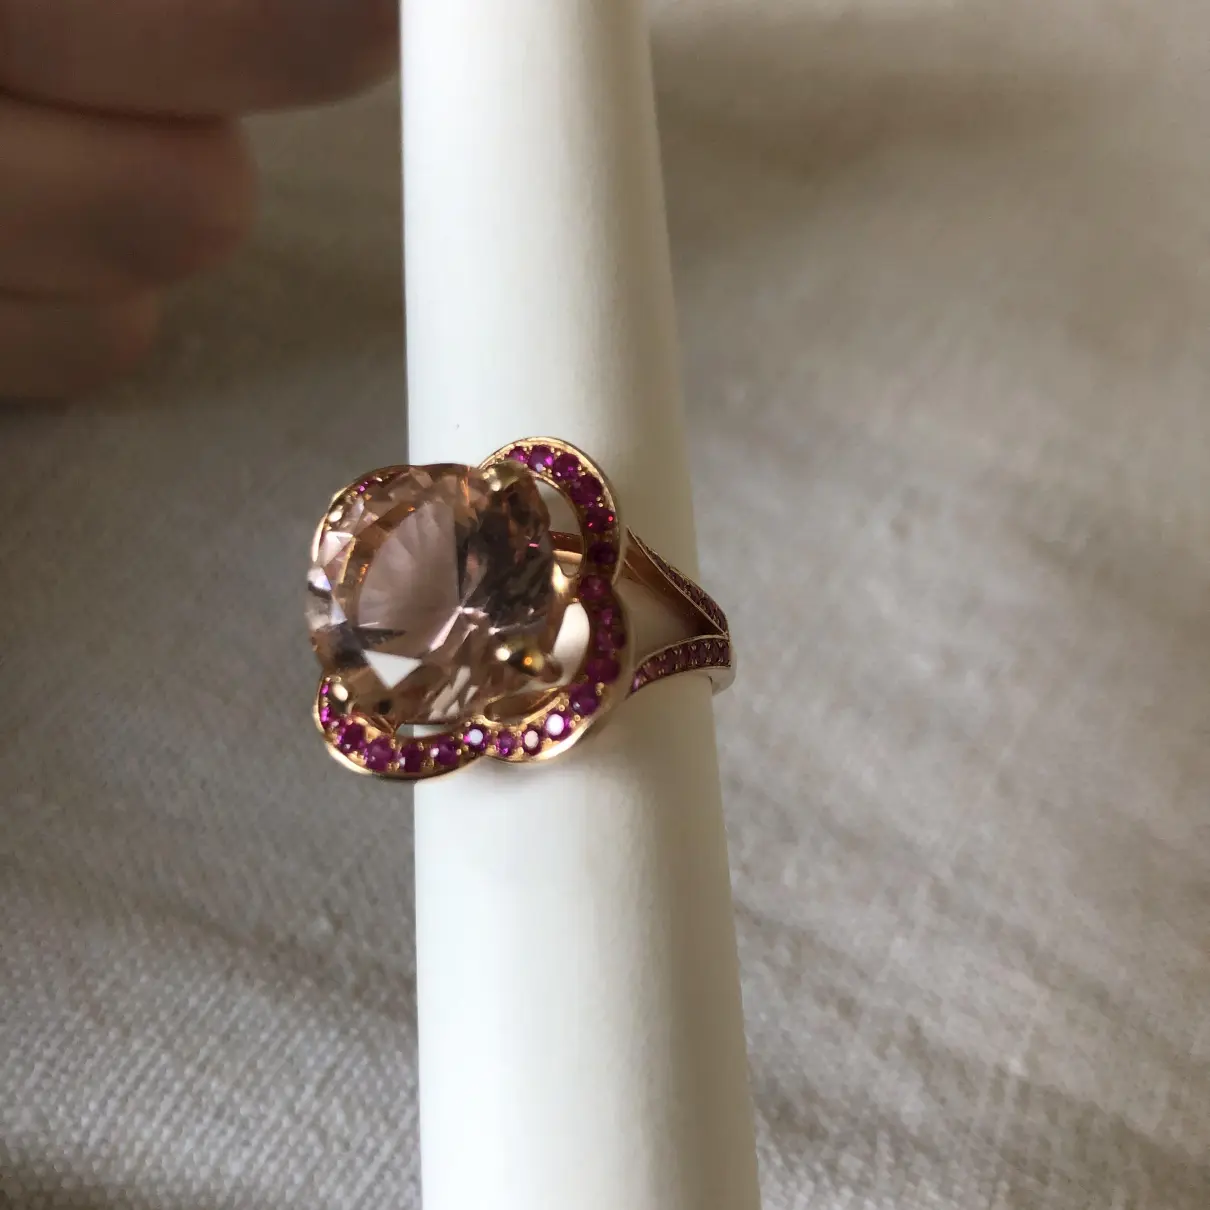 Pink gold ring Mauboussin